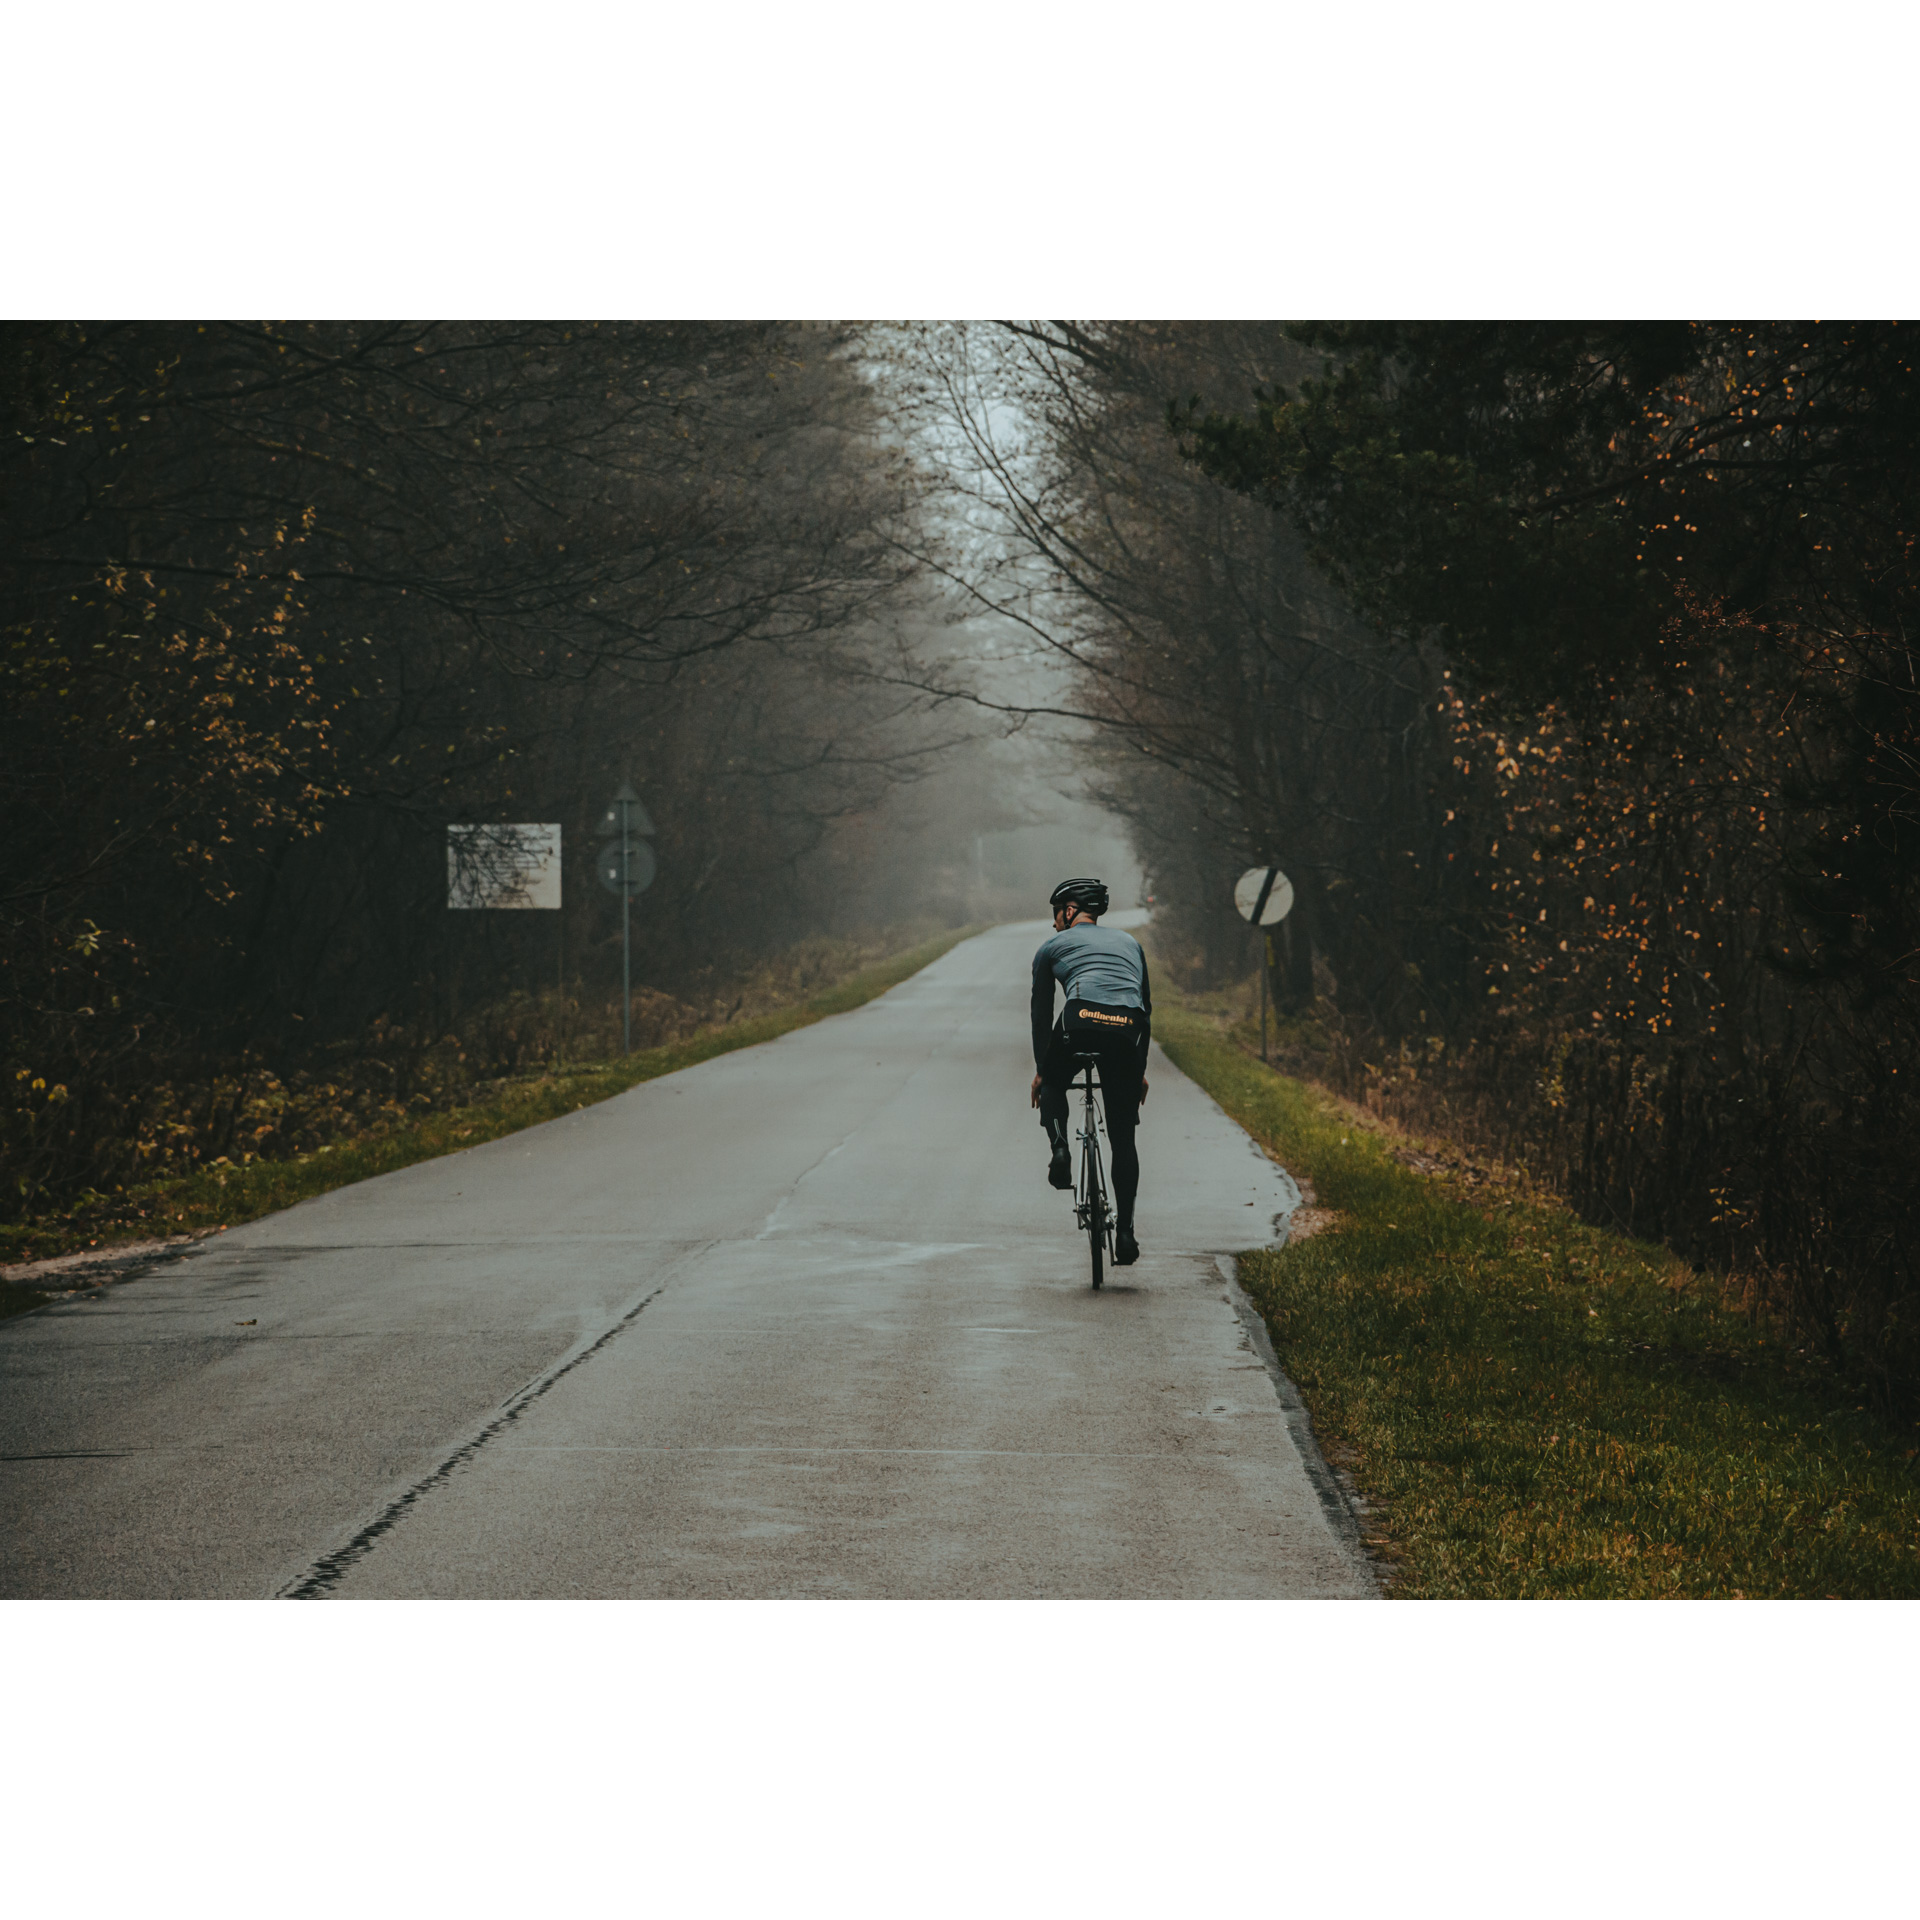 A cyclist in a blue and black outfit riding an asphalt road leading through a dark forest with fog in the distance